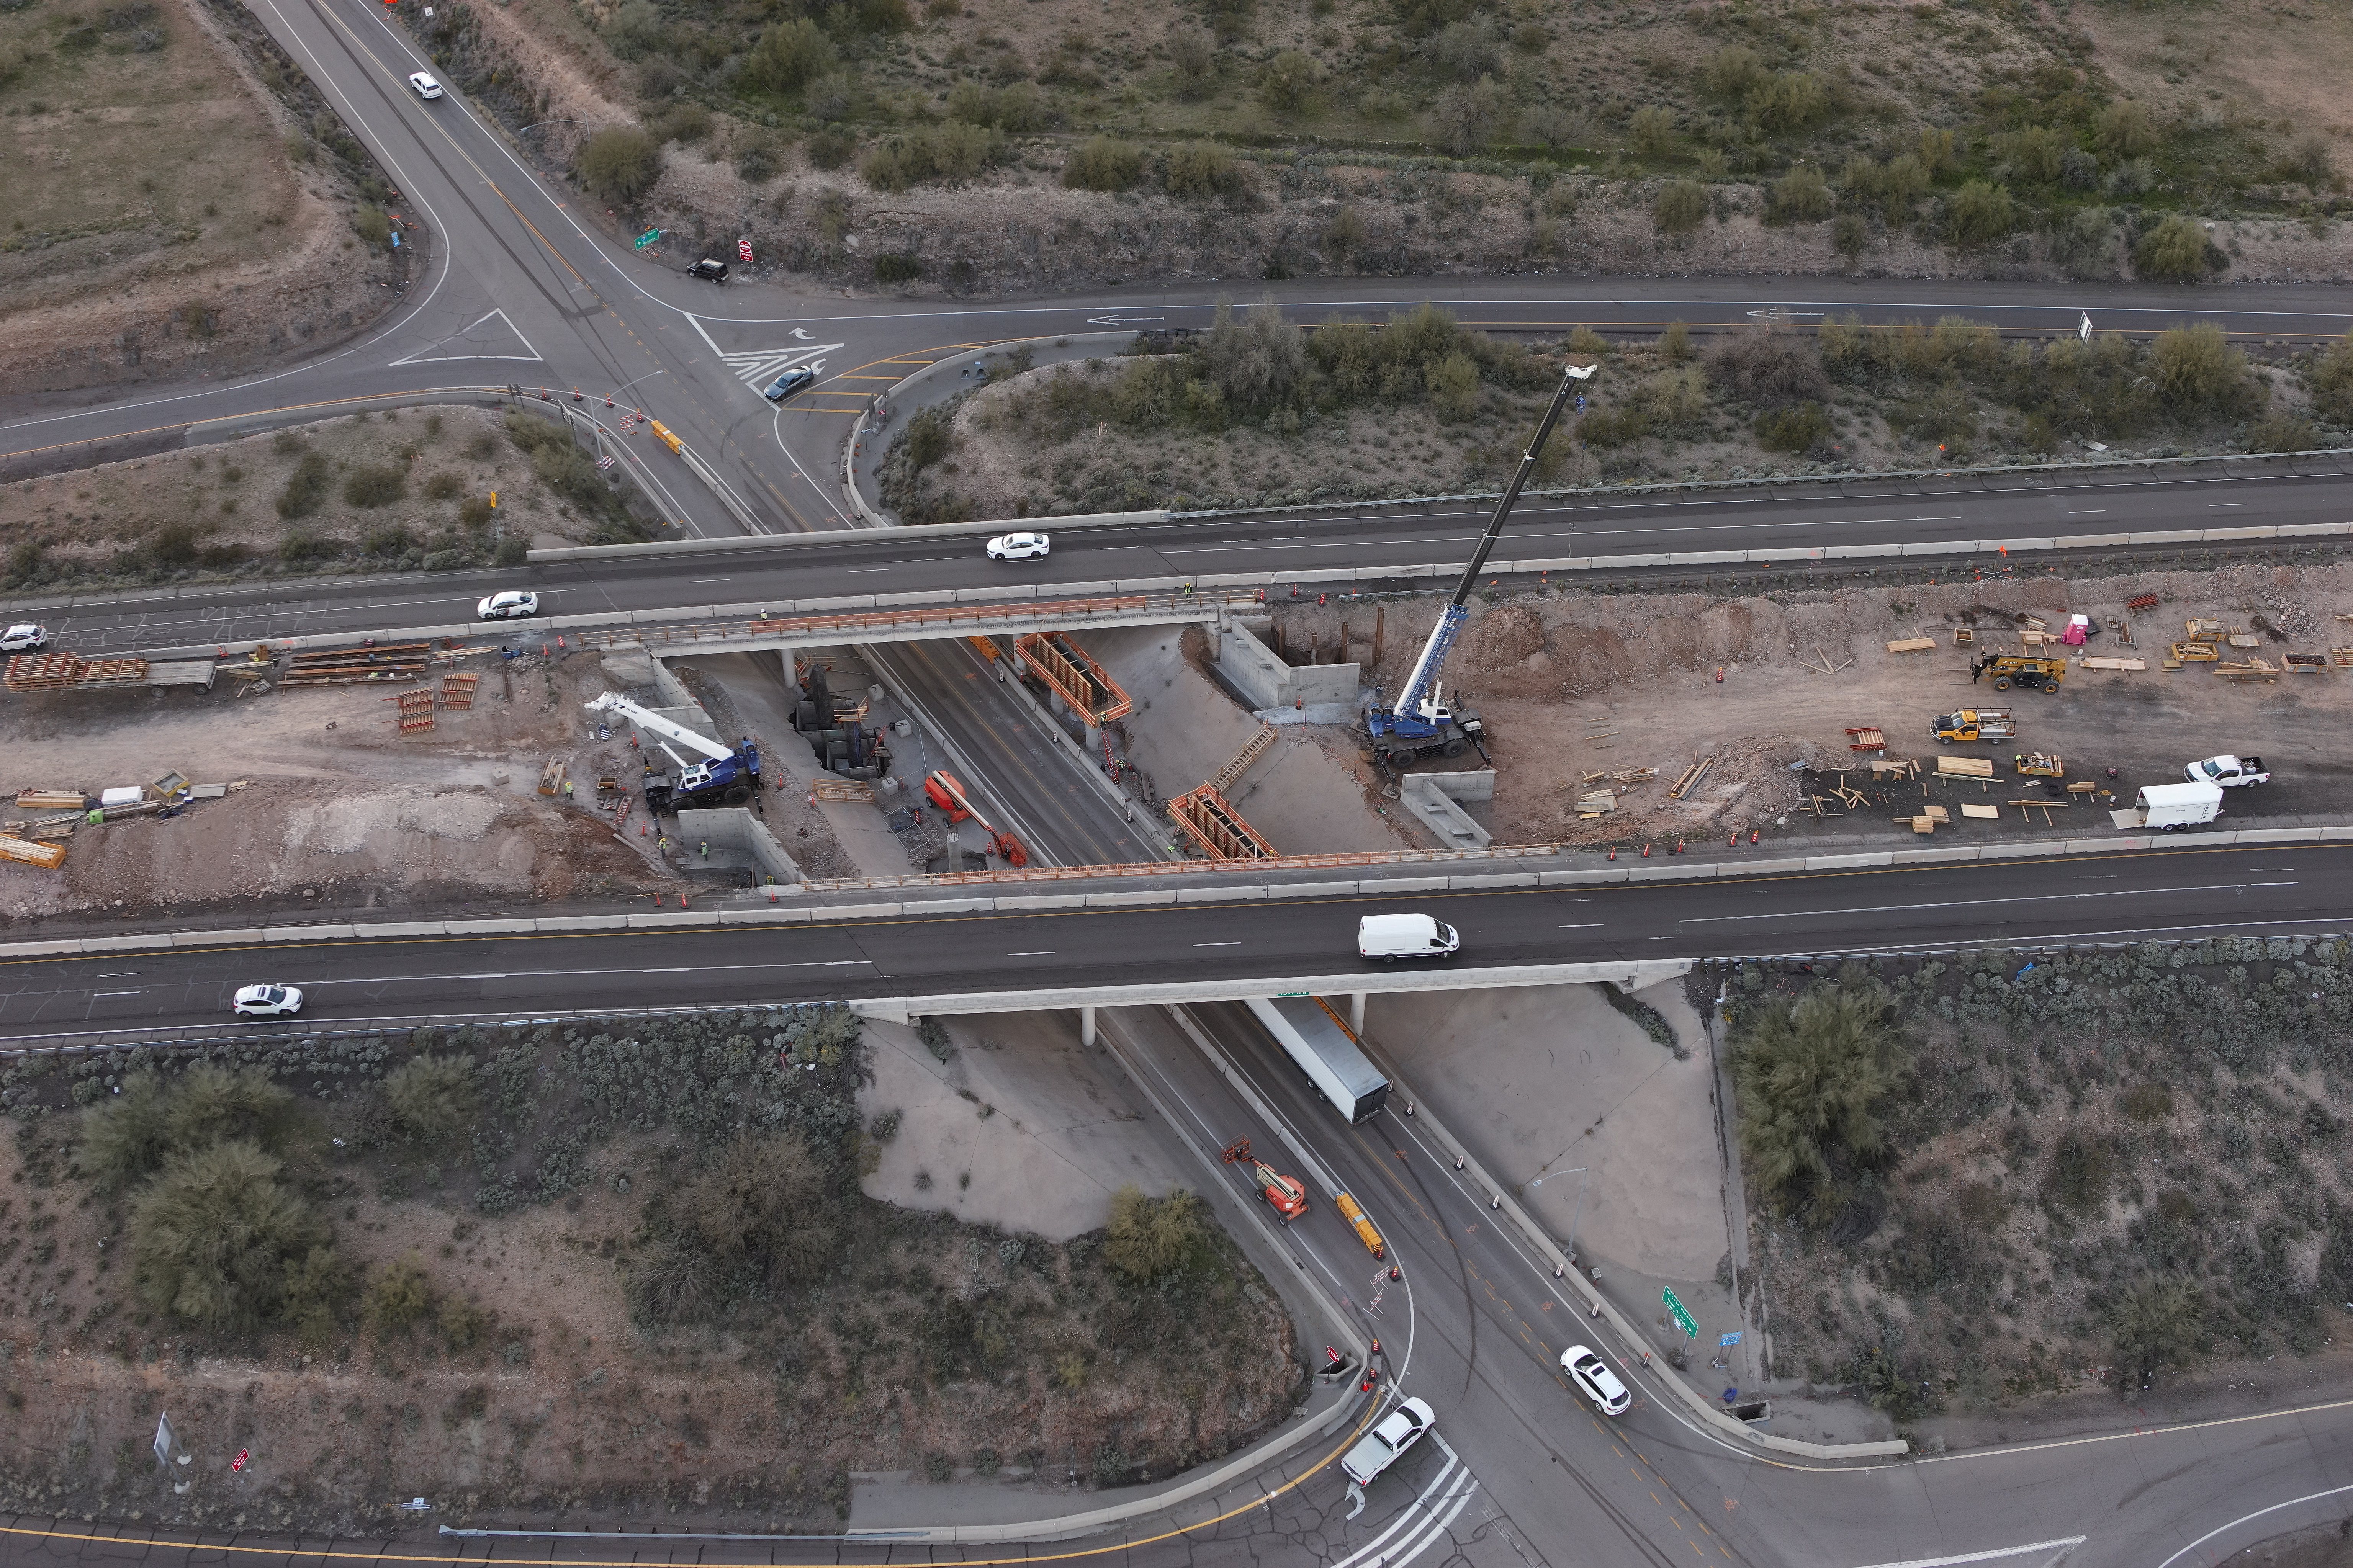 Construction occurs on a highway.